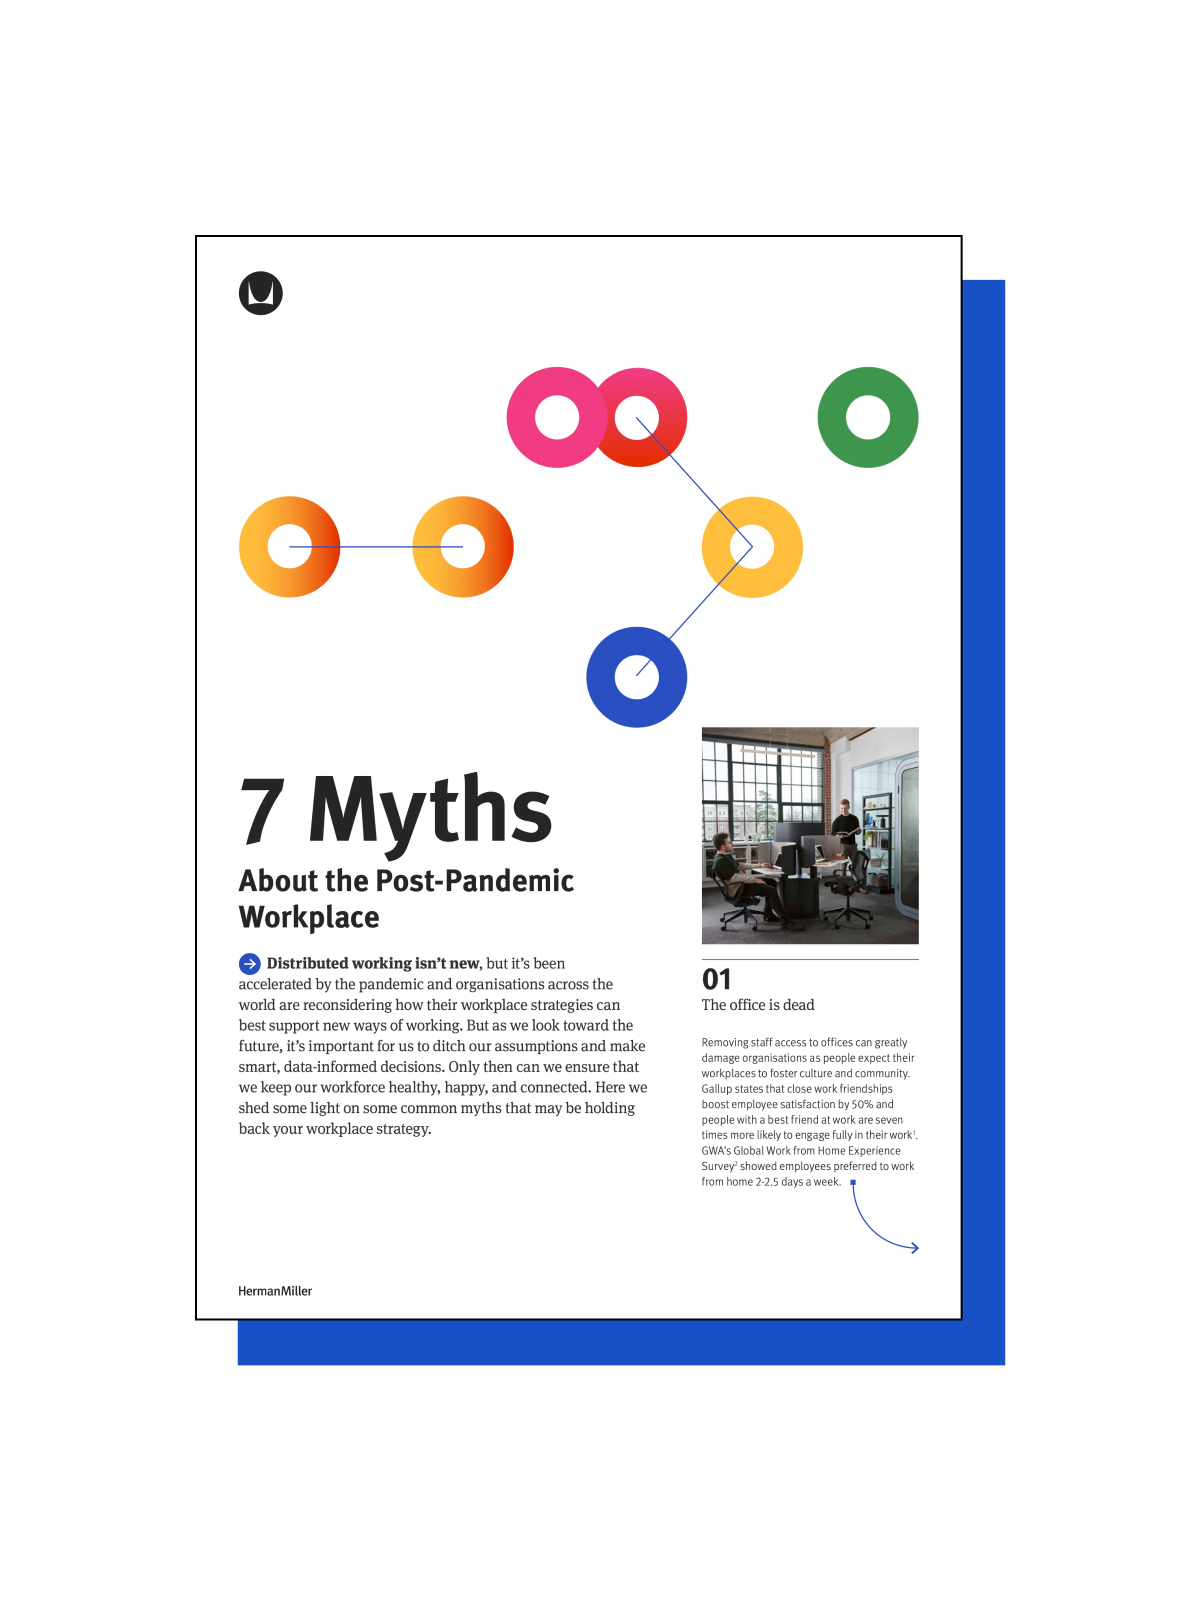 The front cover of the '7 Myths about the Post-Pandemic Workplace' white paper.